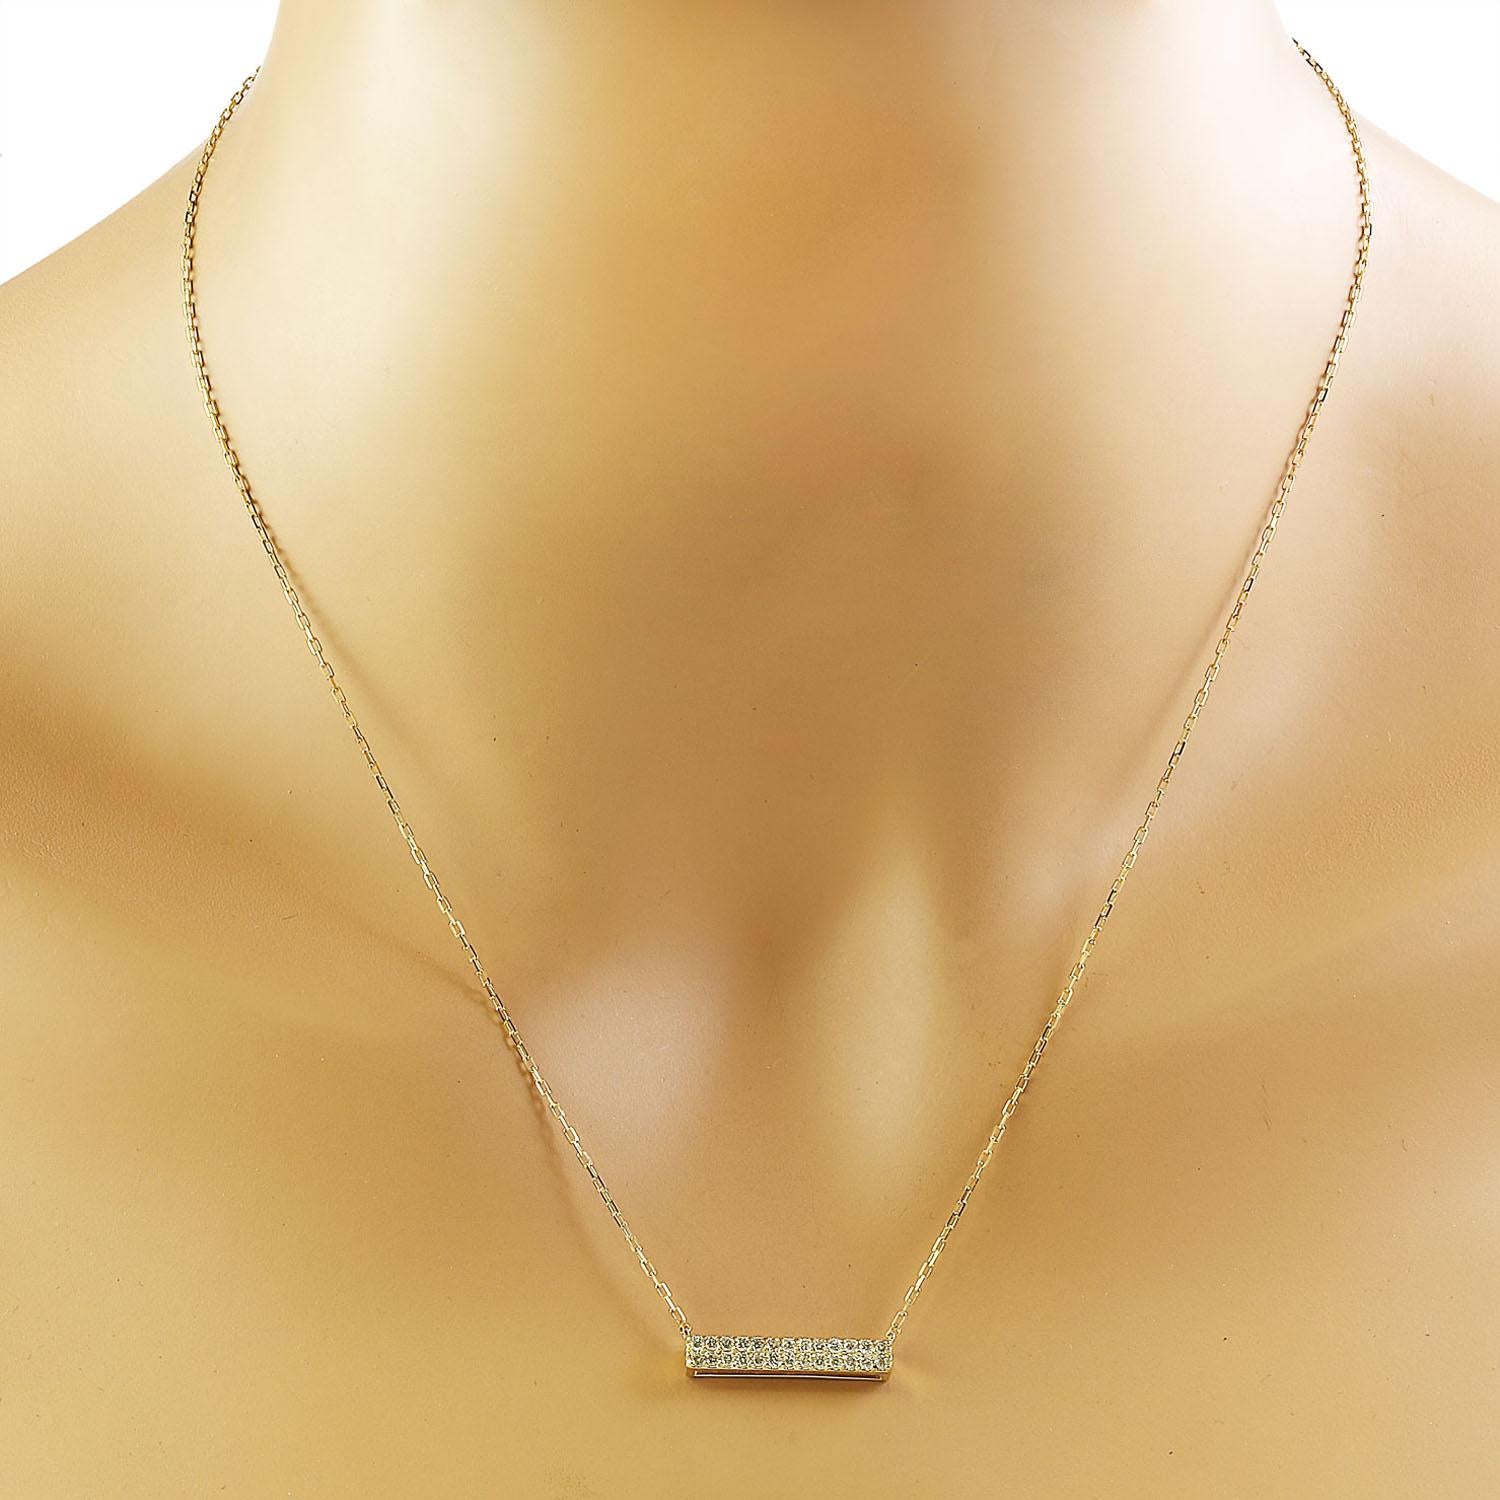 Modern Exquisite Natural Diamond Bar Necklace In 14 Karat Yellow Gold  For Sale